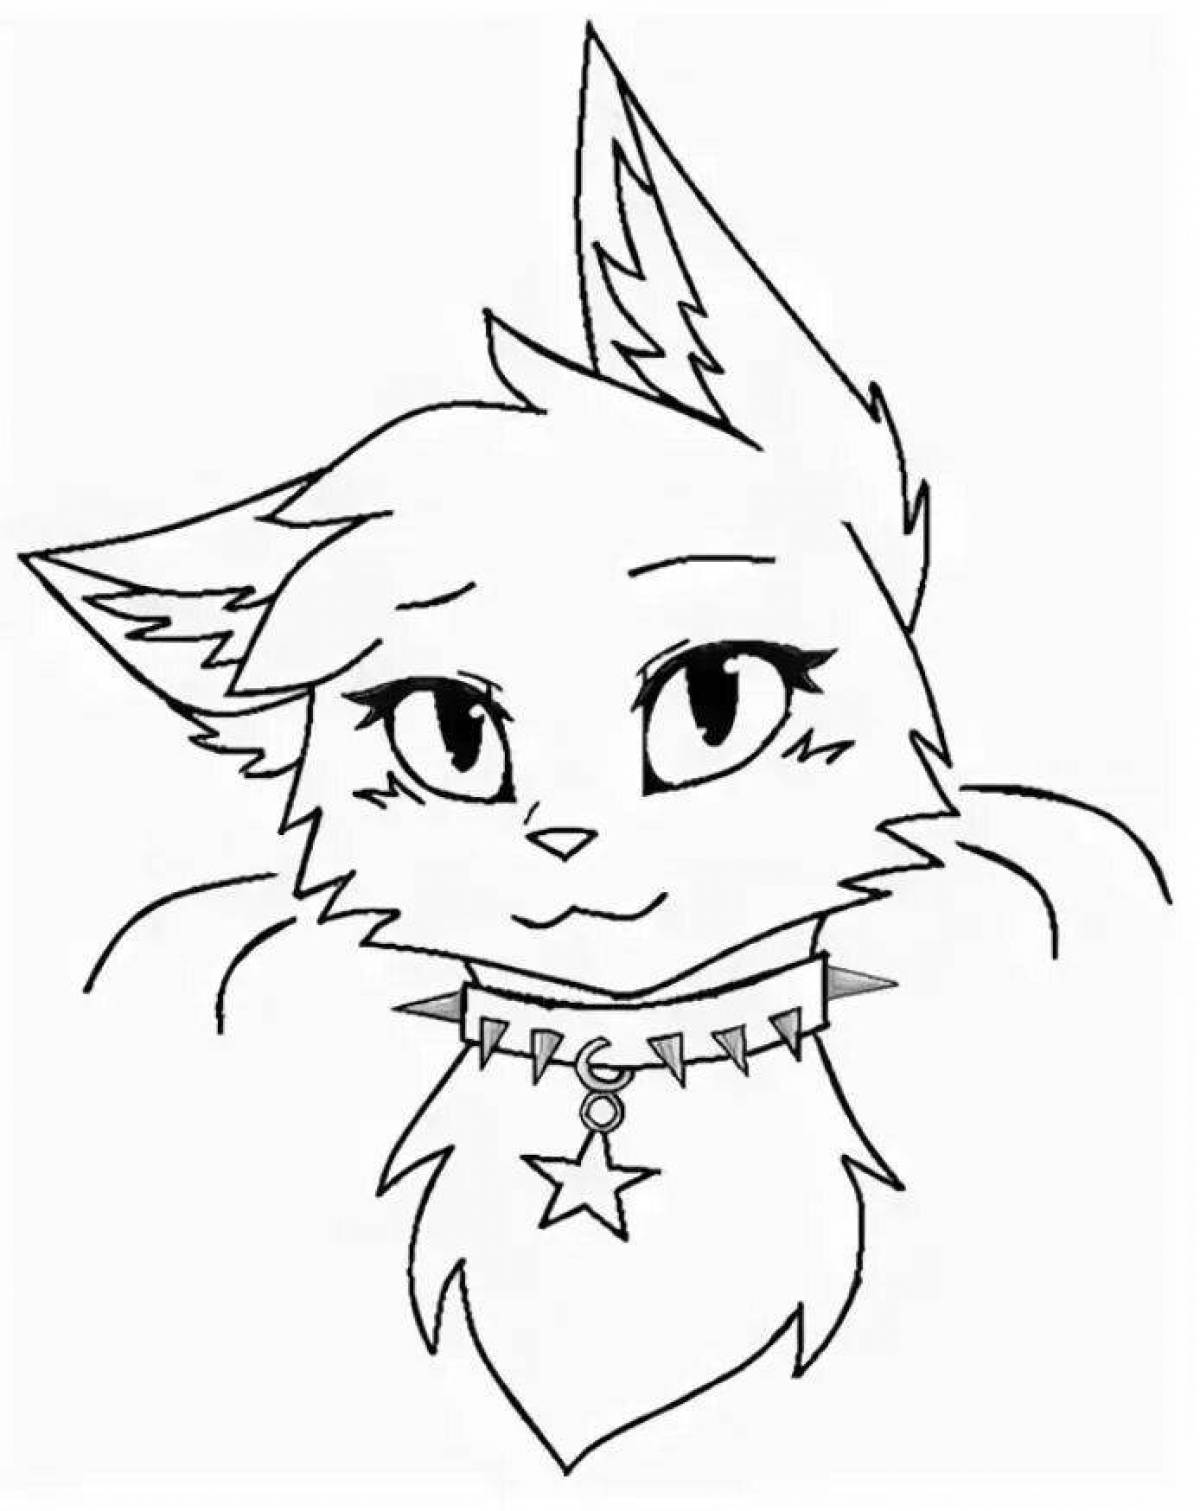 Animated anime cat coloring page